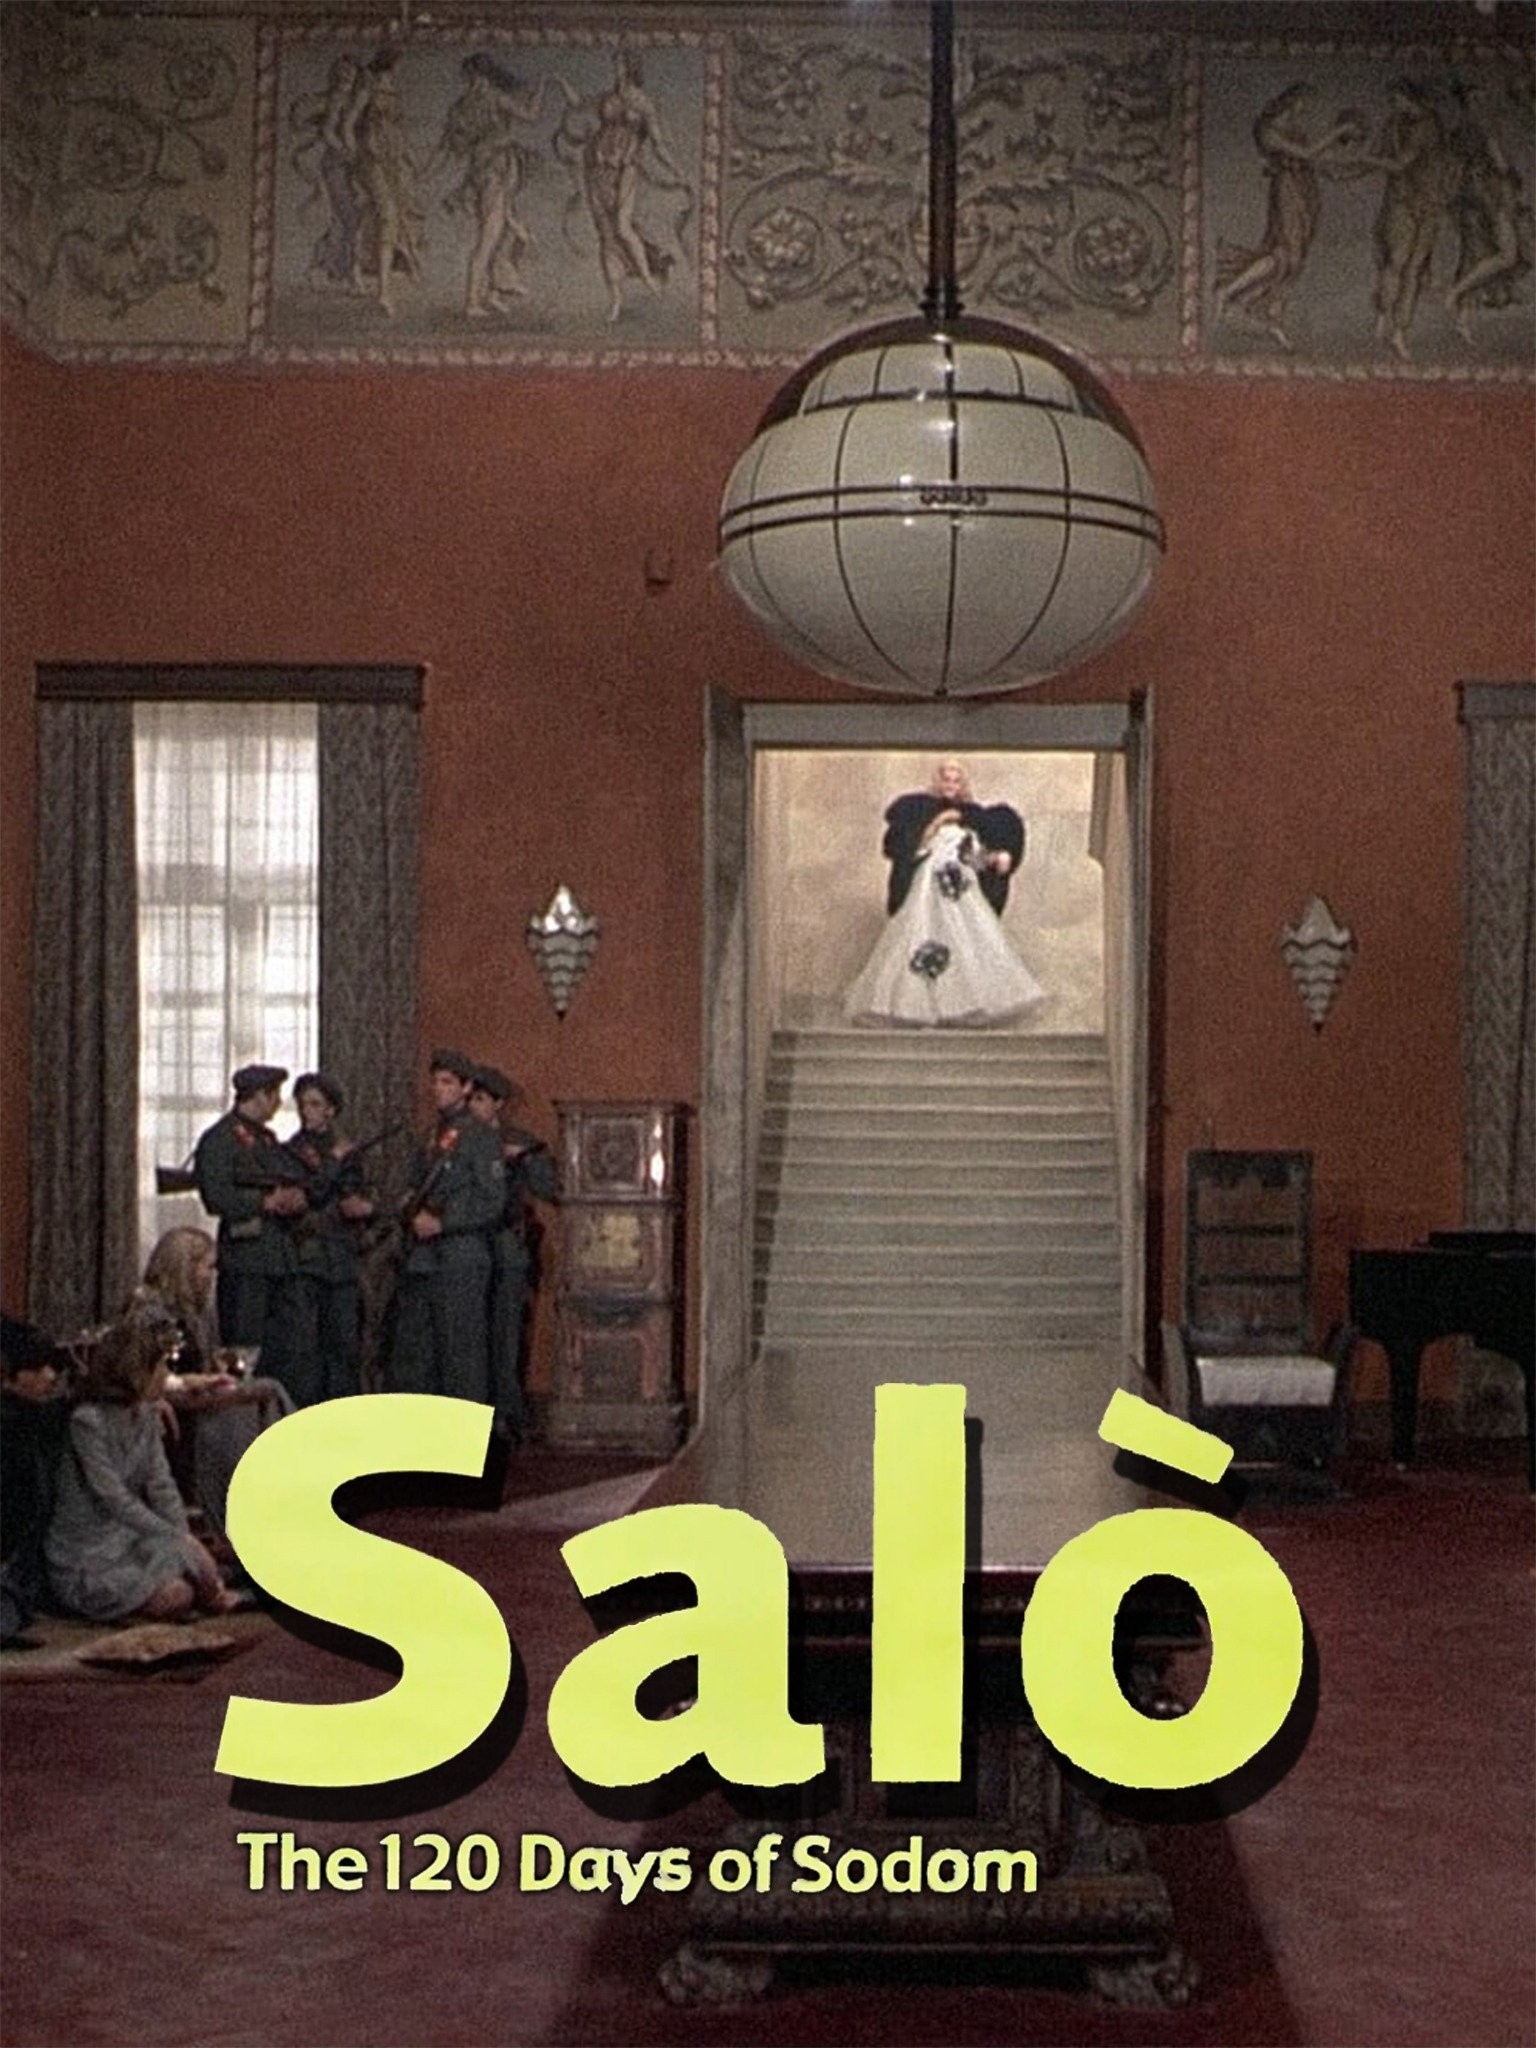 andrew plax recommends salo full movie online pic